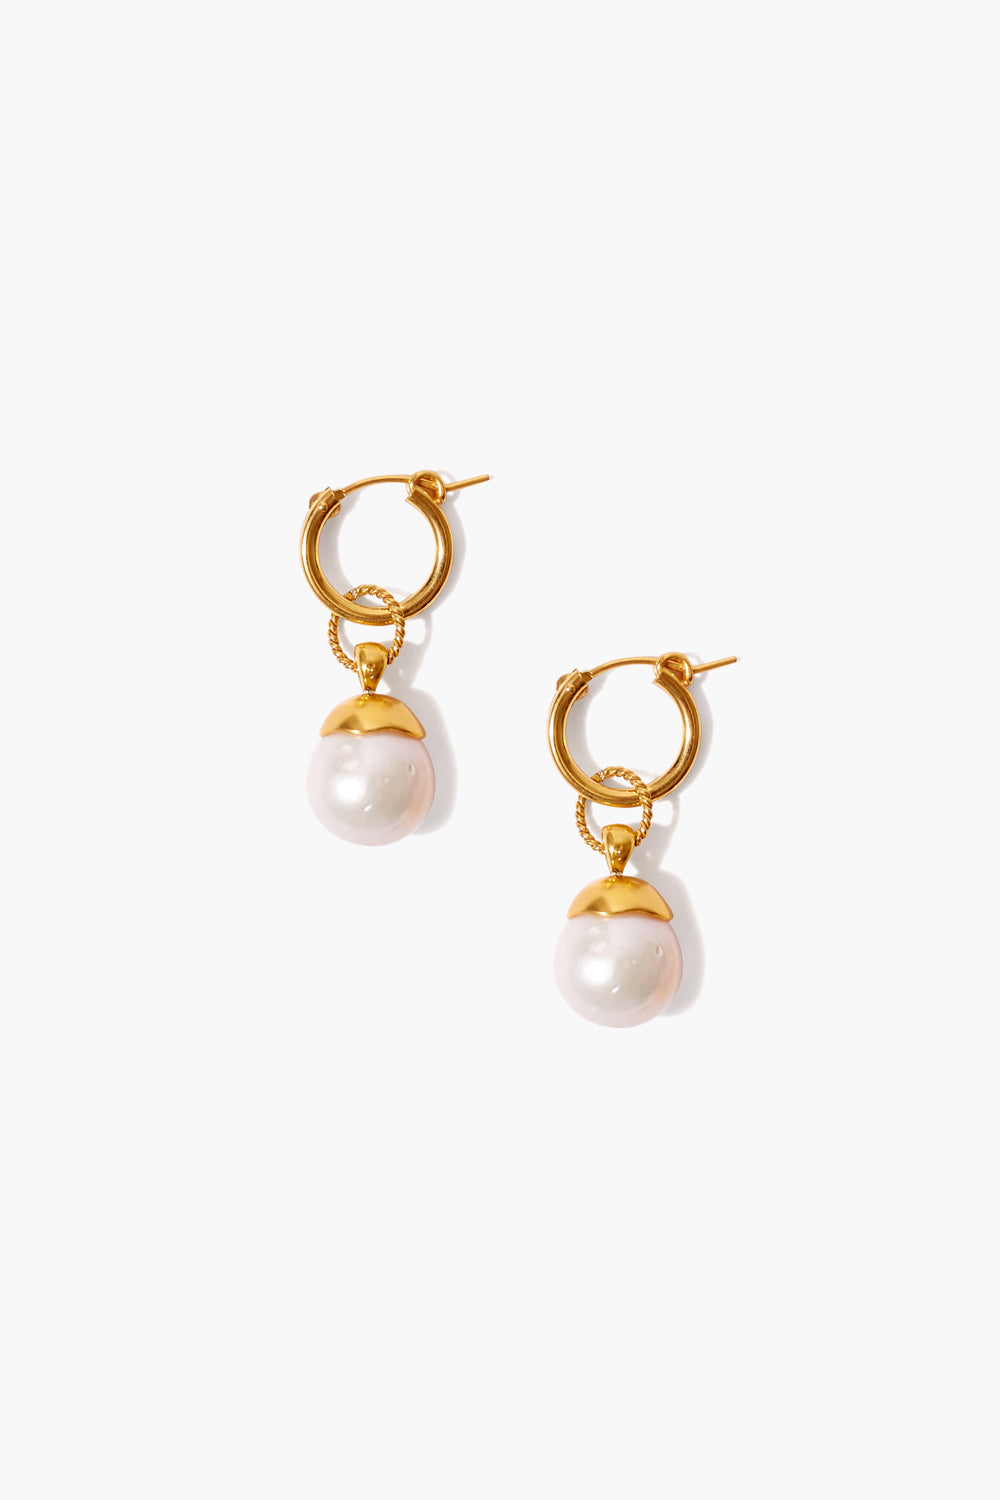 WHITE PEARL GOLD BAROQUE EARRINGS - Kingfisher Road - Online Boutique